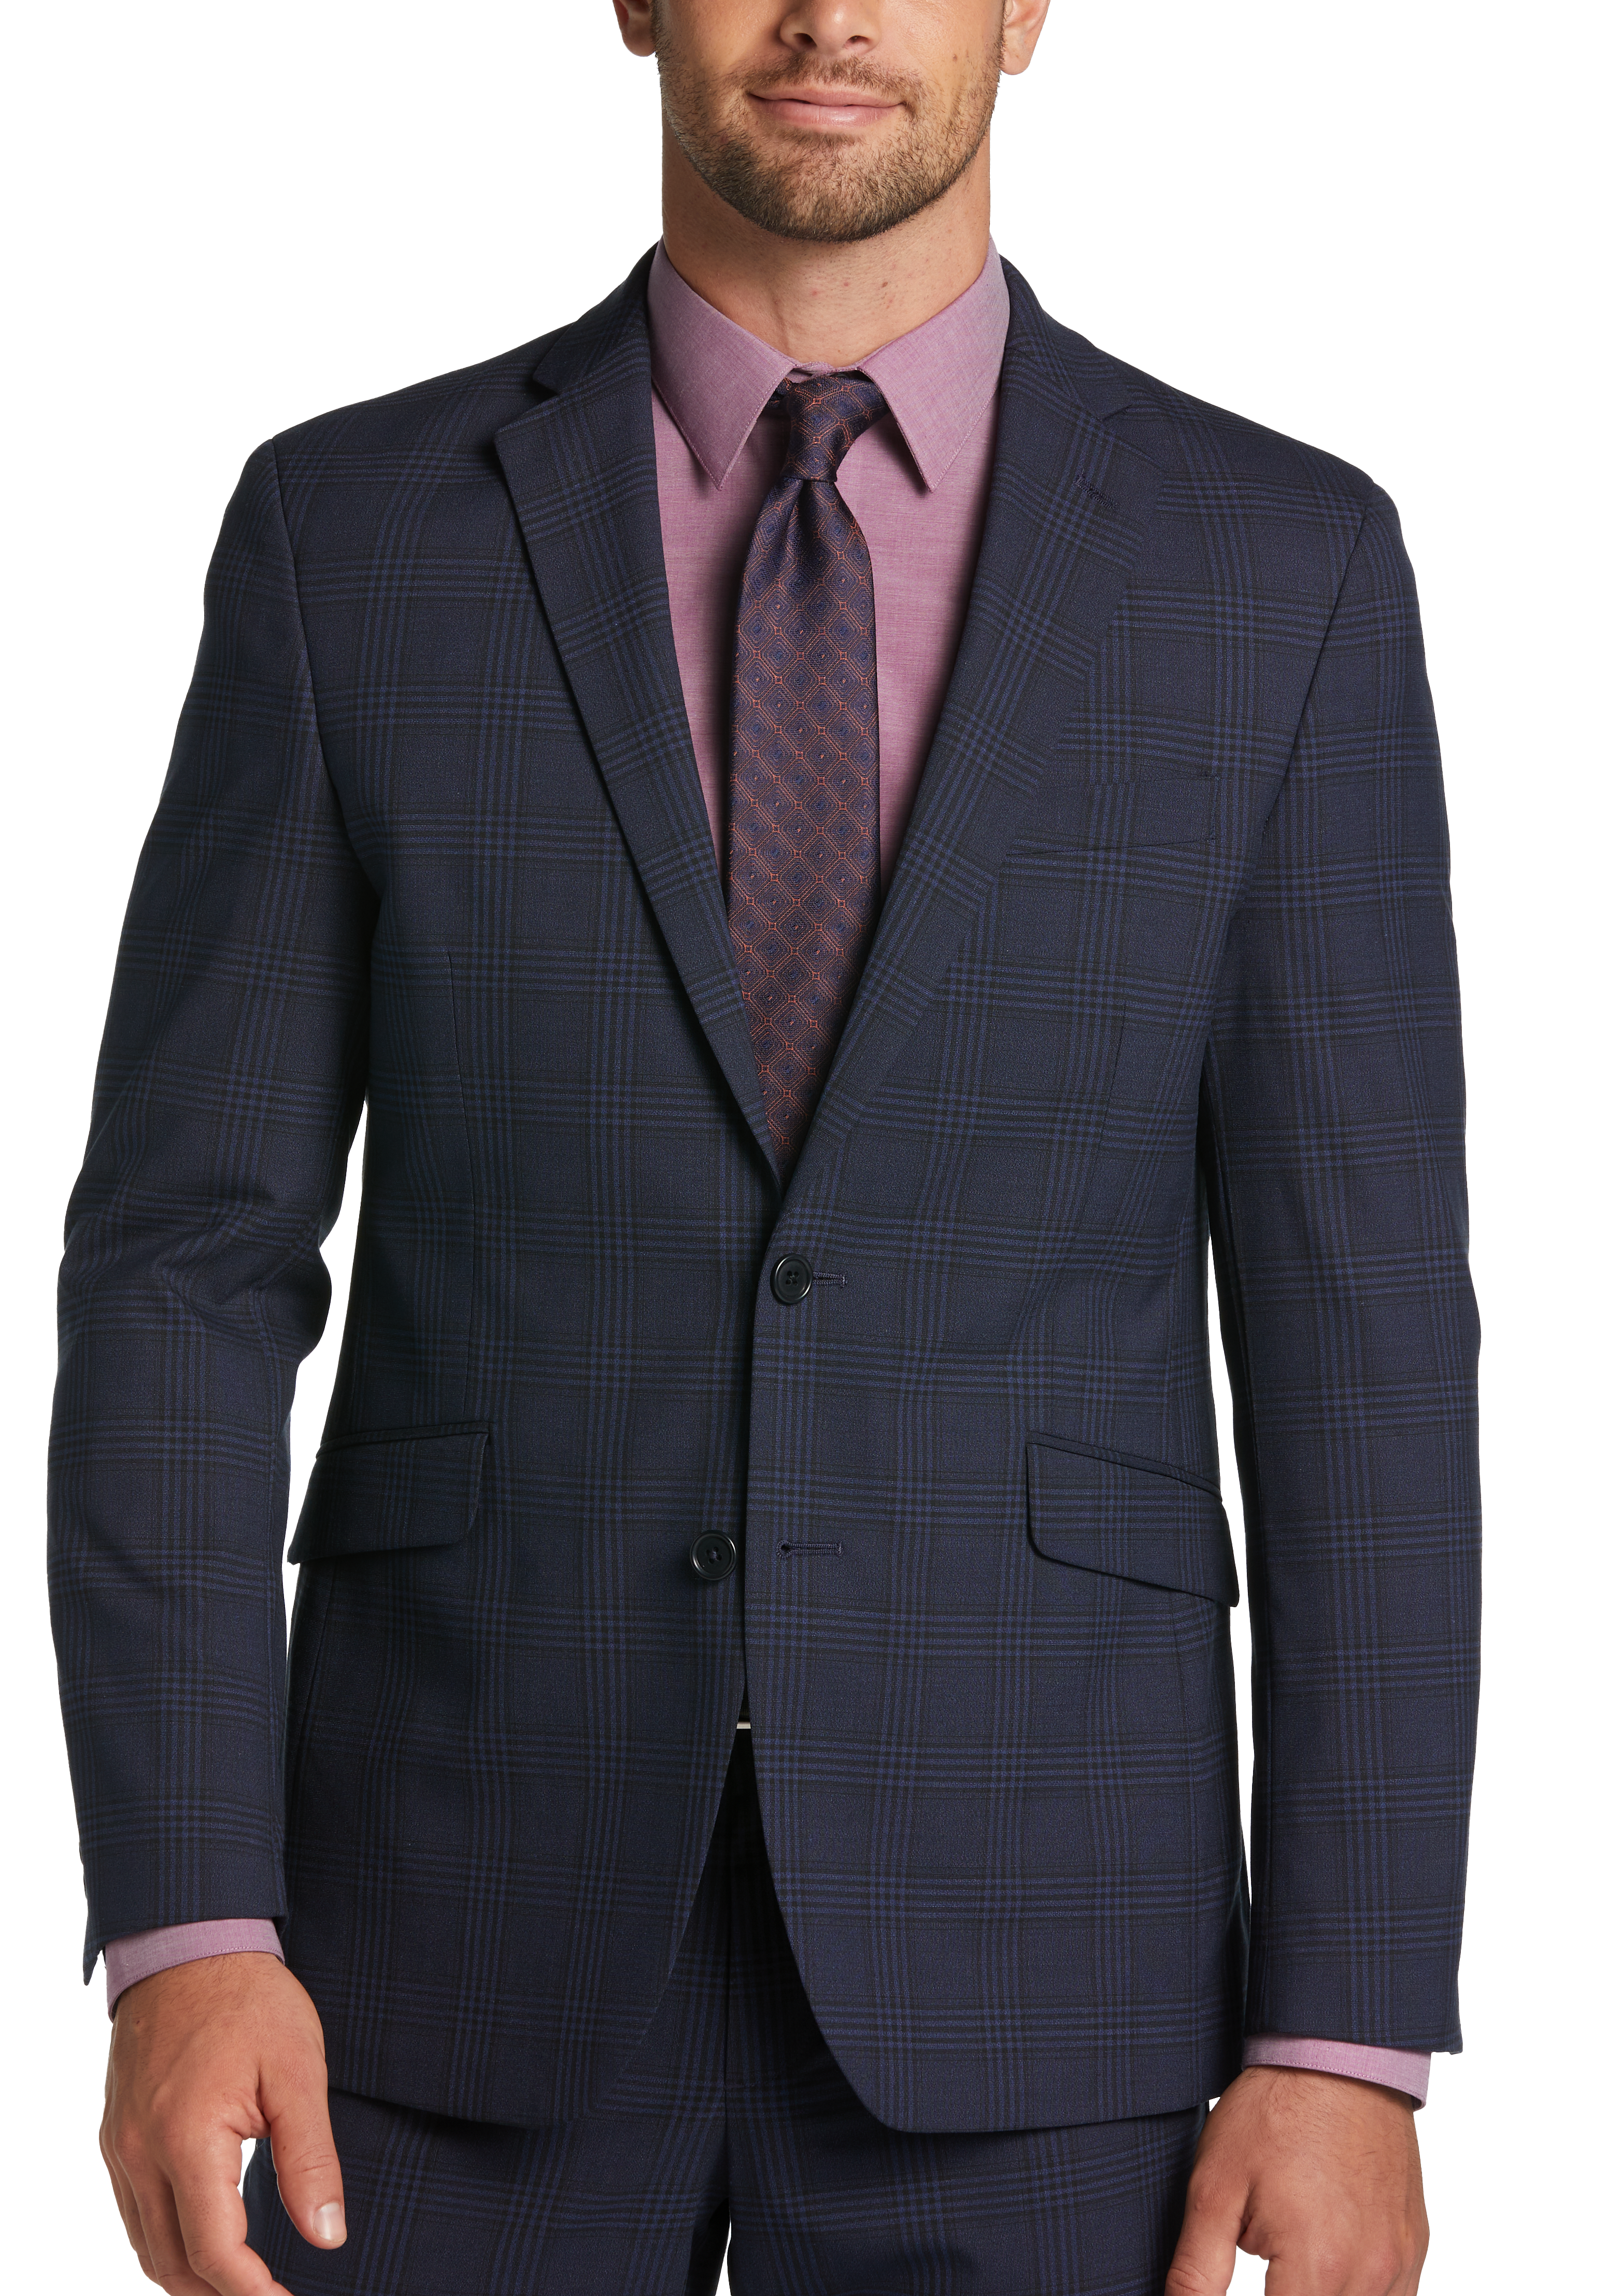 Men's Clothing & Suits in New York, NY | 10020 | Men's Wearhouse